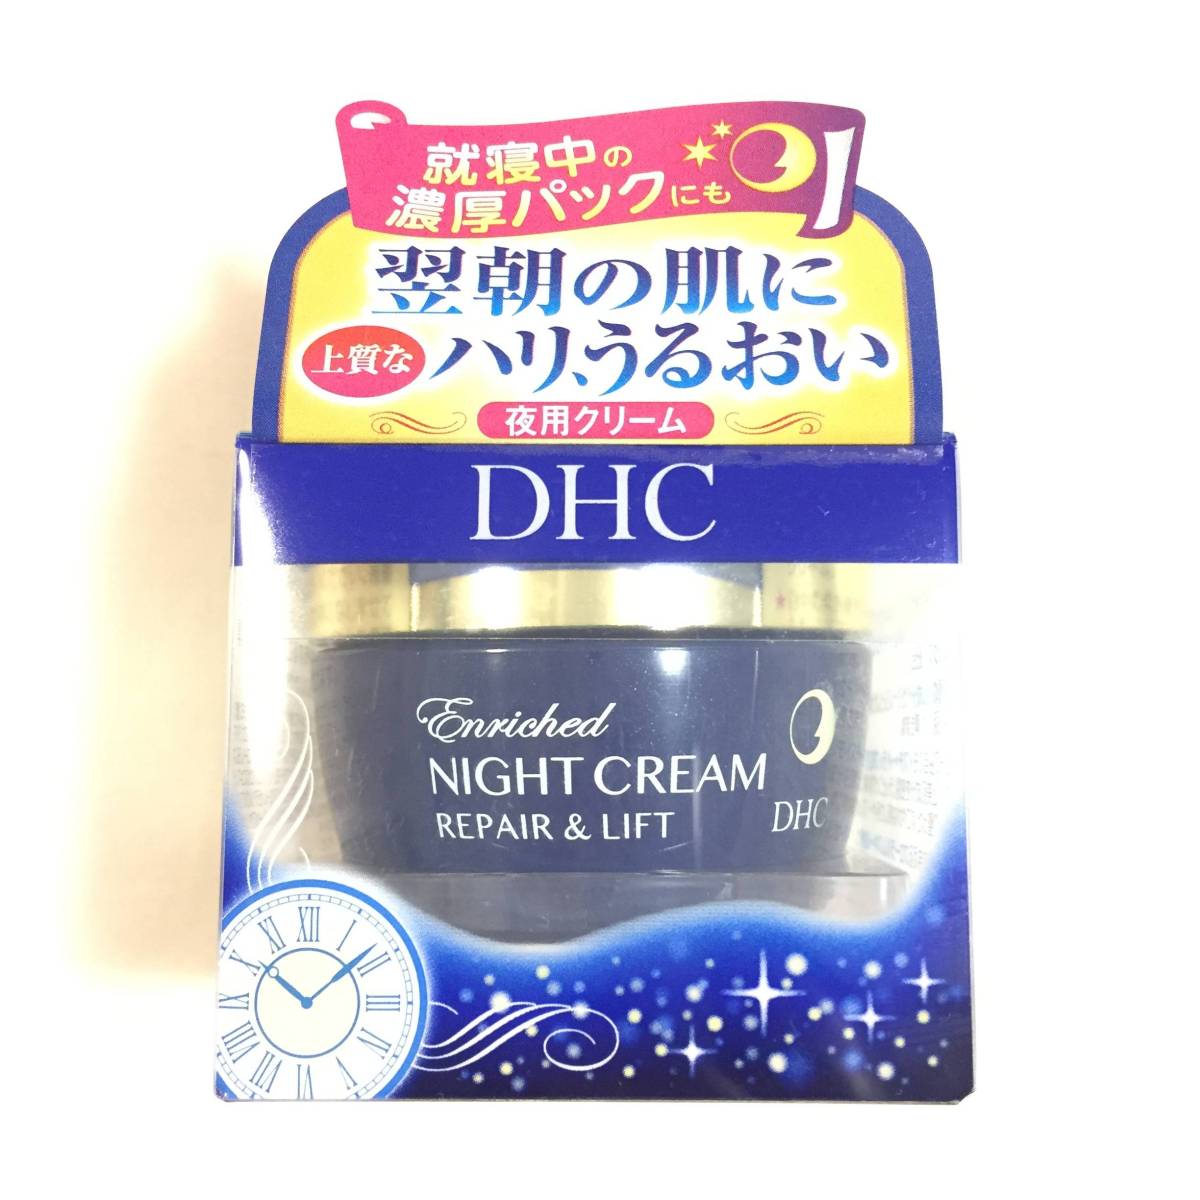  new goods *DHC (ti- H si-)en Ricci Night cream R&L (SS)* night for cream . thickness pack 